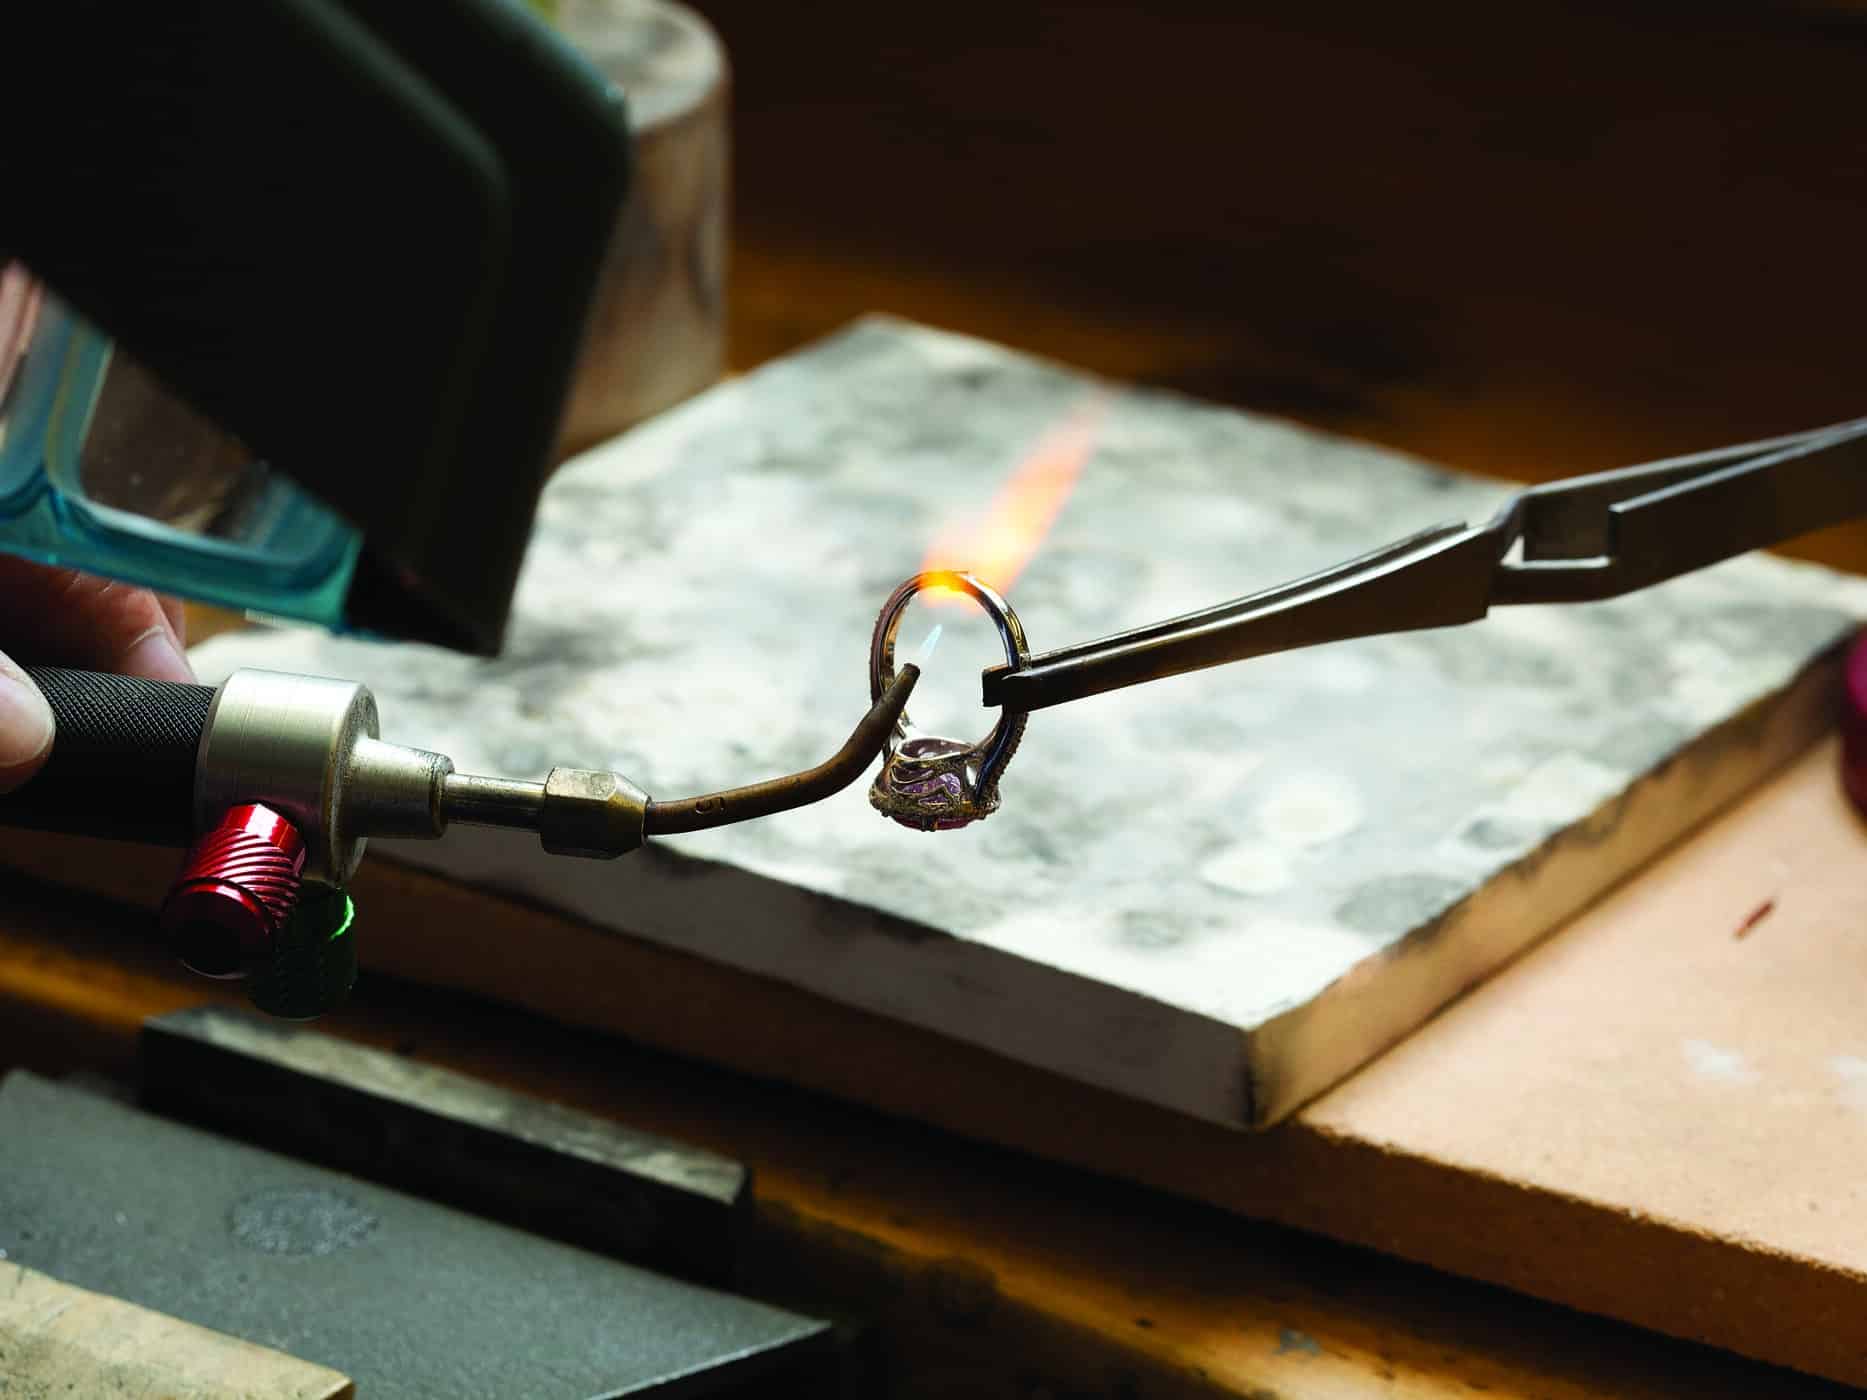 a ring being held in tweezers while a jeweler is using a torch to repair it